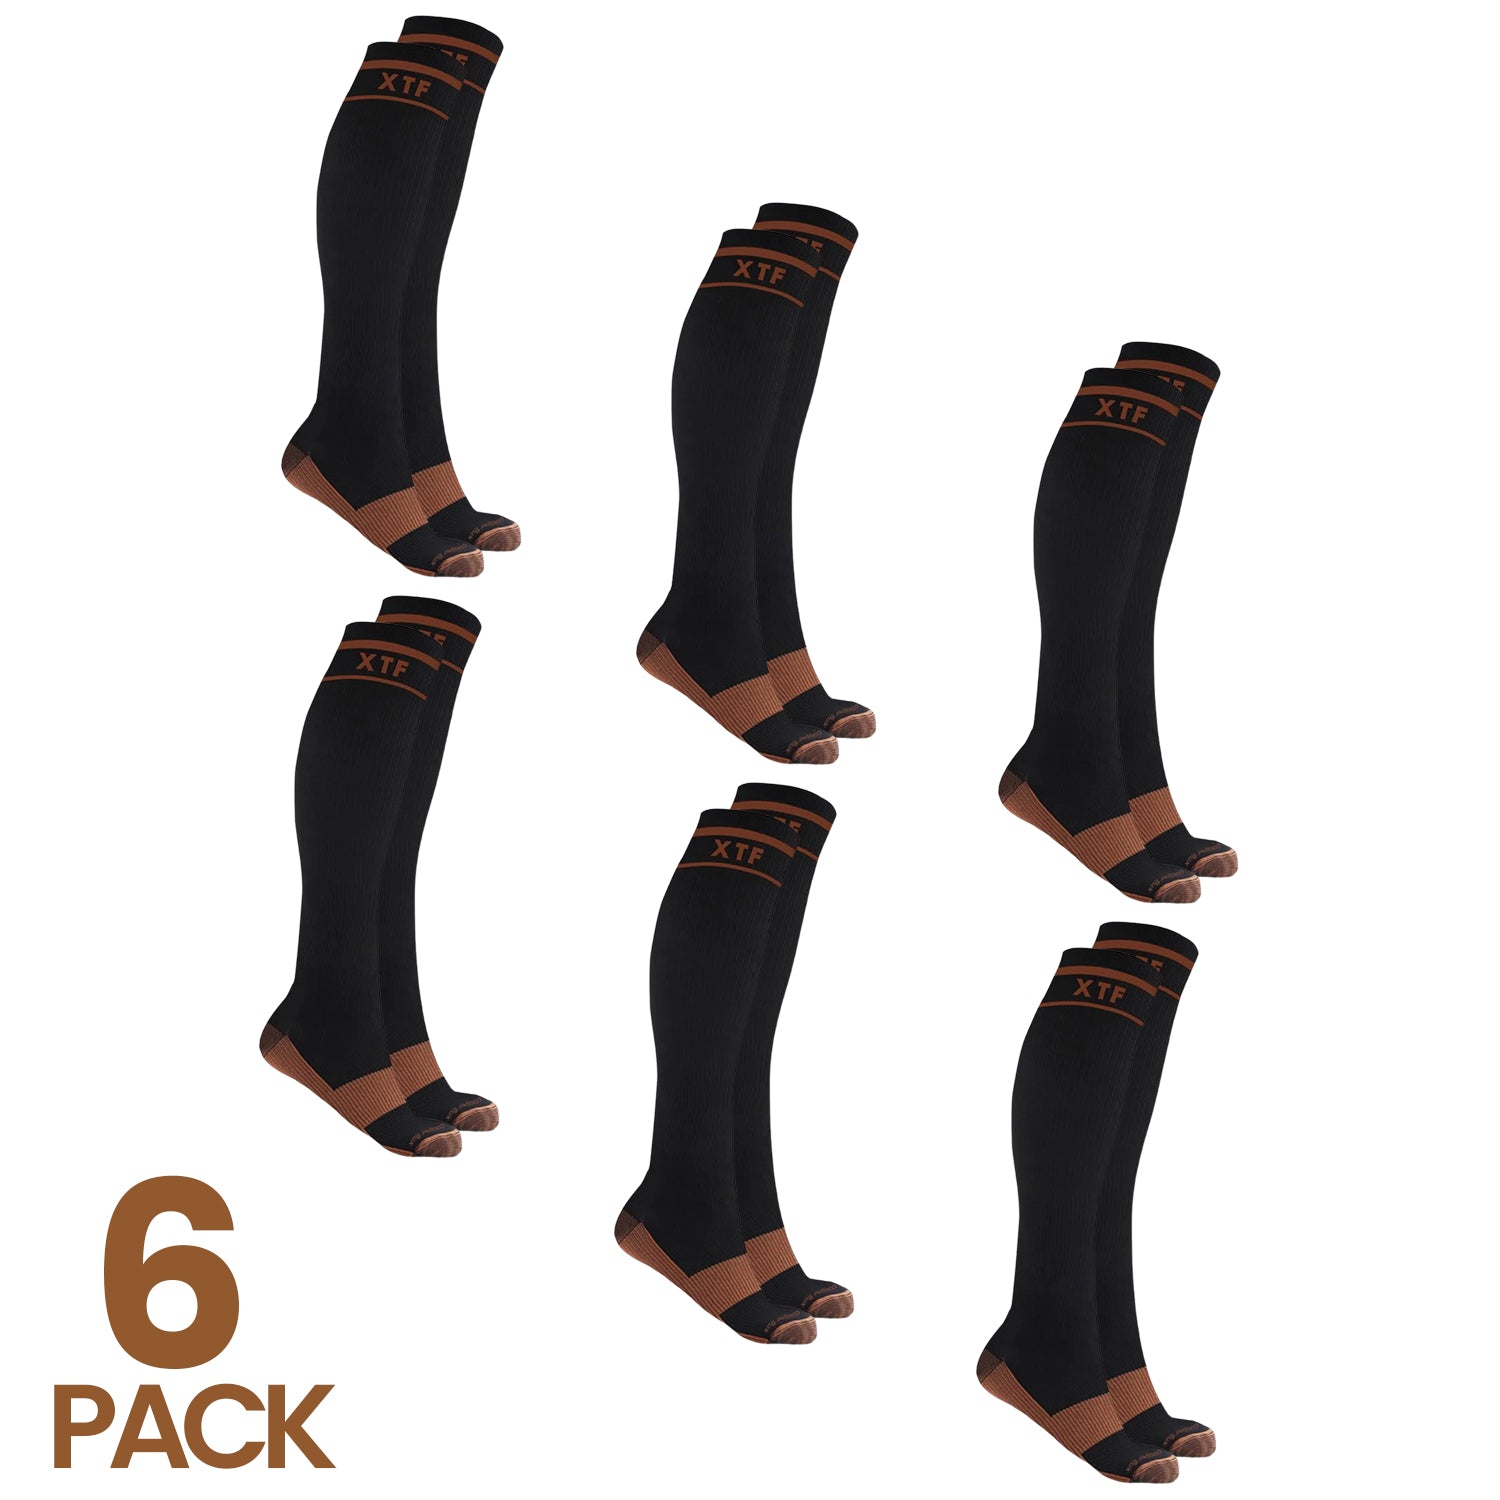 COPPER-INFUSED KNEE-HIGH COMPRESSION SOCKS (6-PAIRS) – CopperFlux